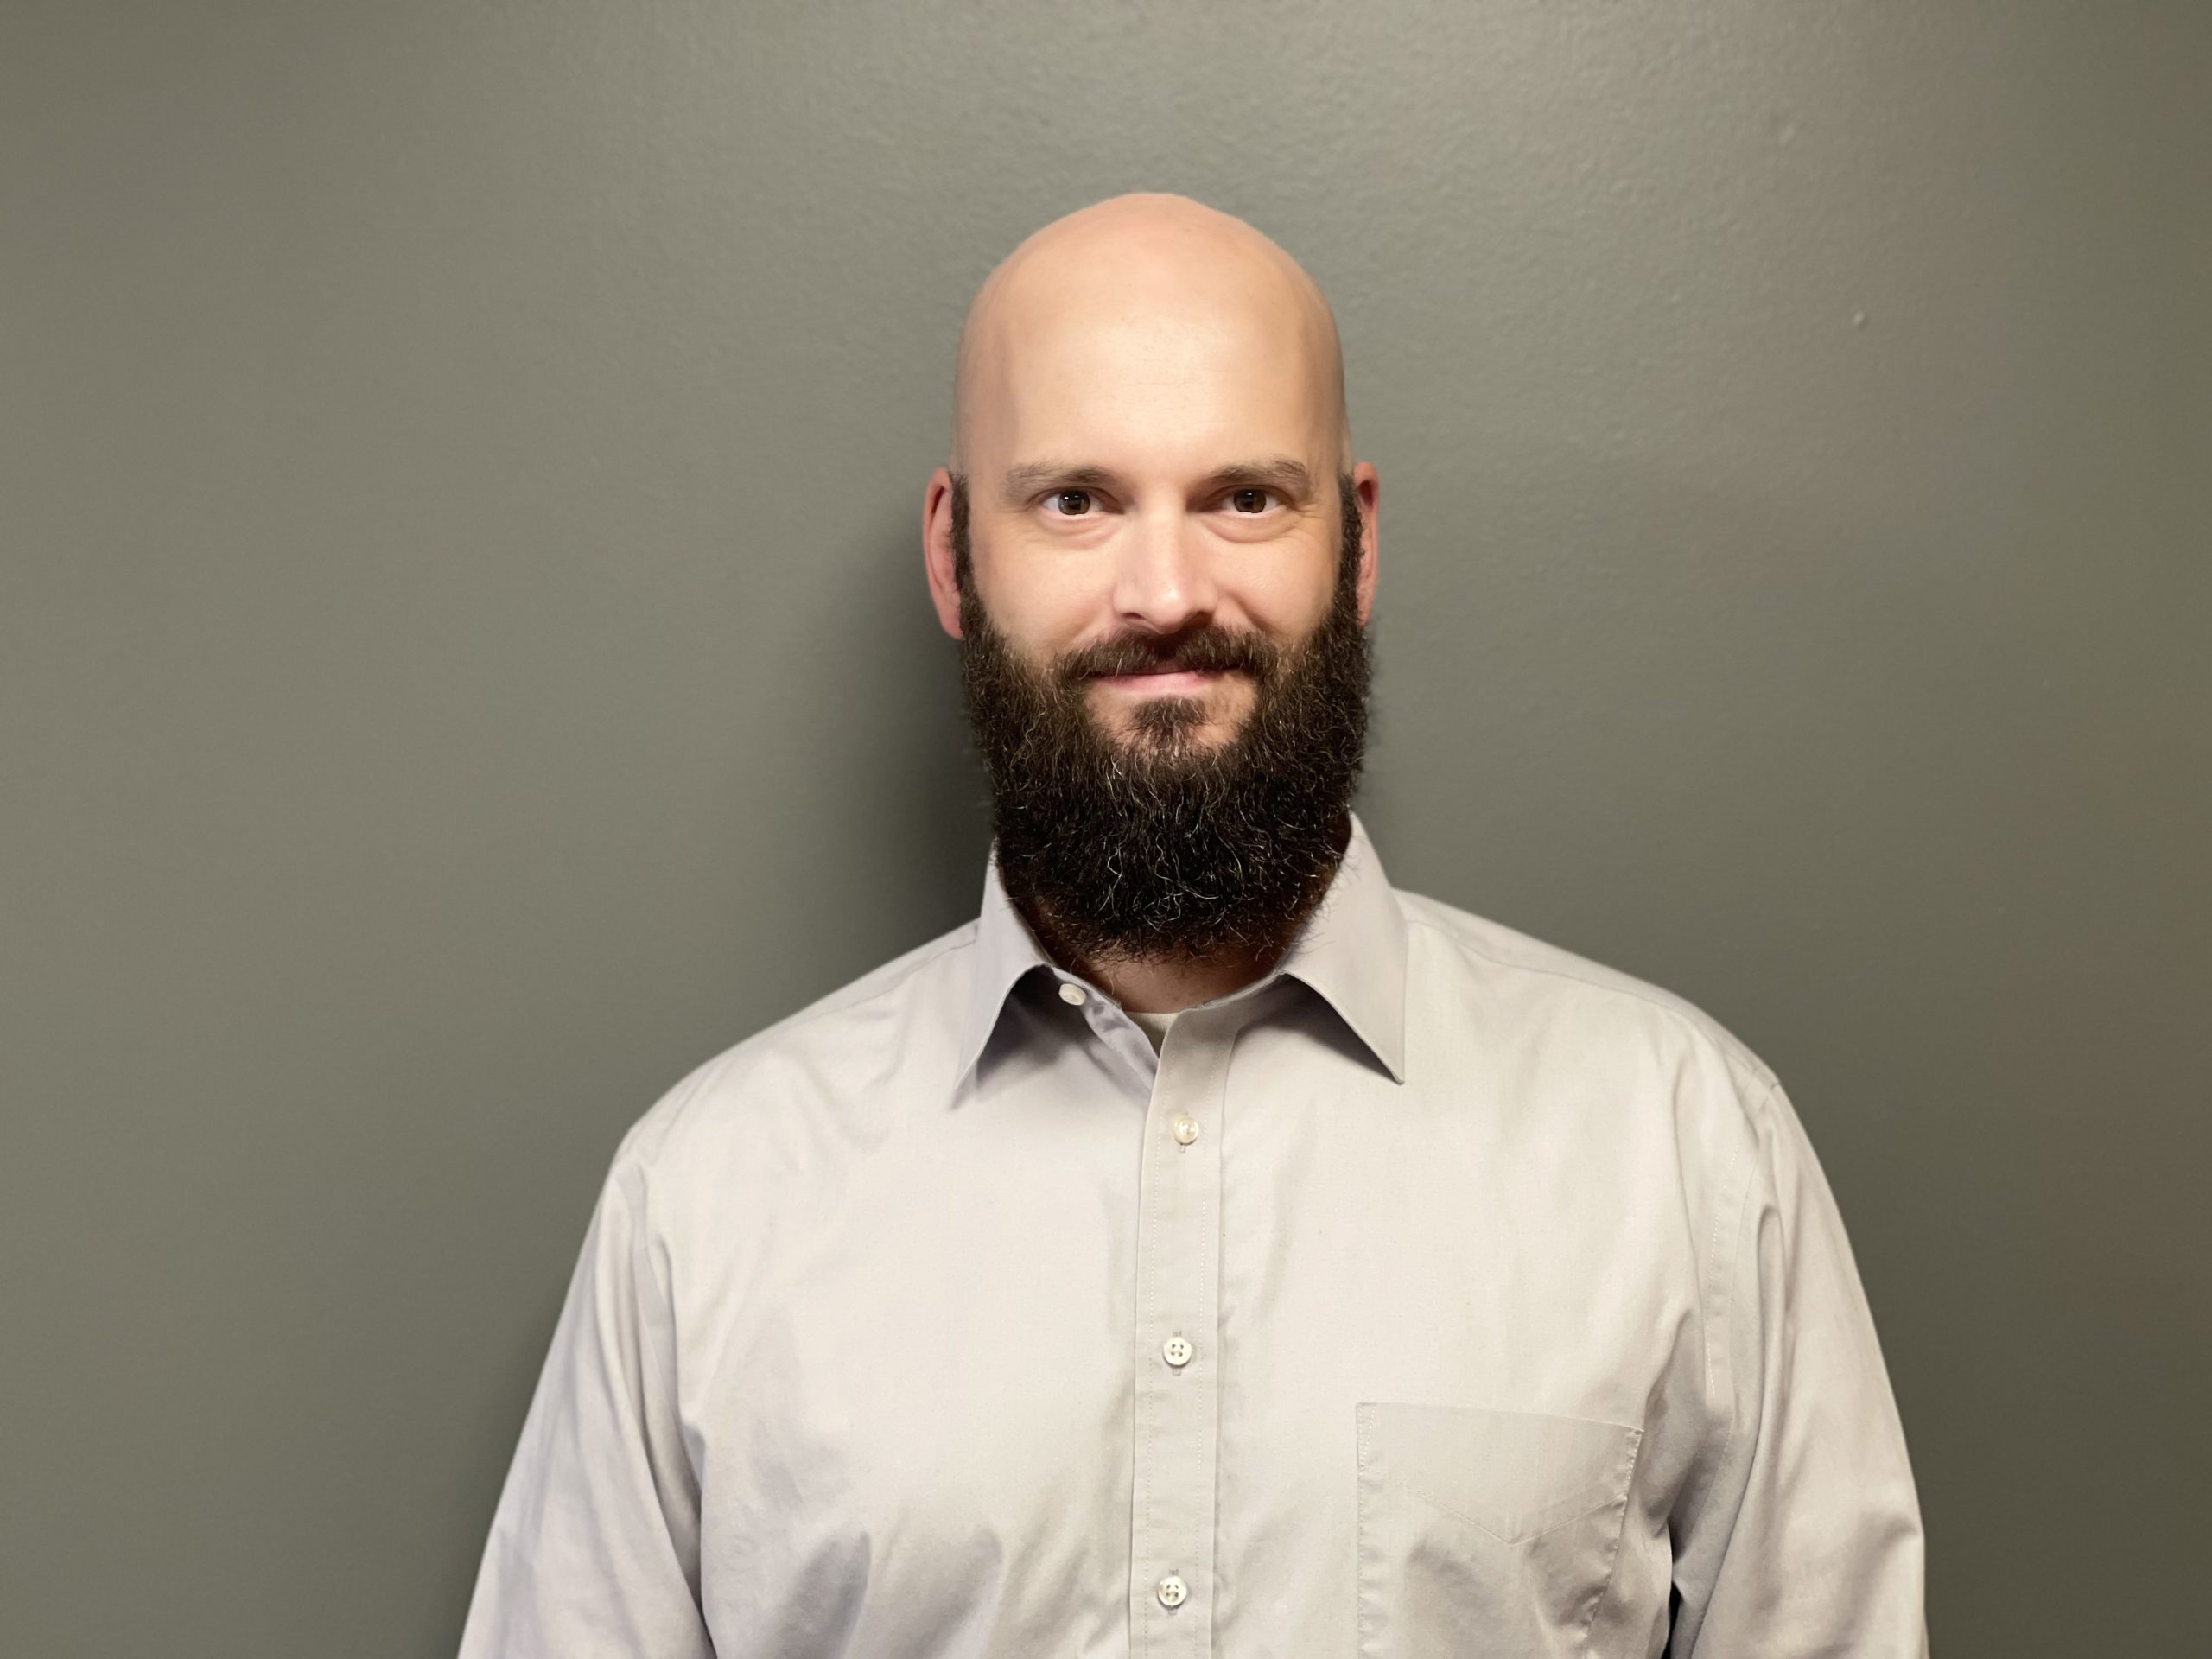 a white bald man with a dark black beard stands in front of a grey wall. He is wearing a kind expression and a light grey button up.